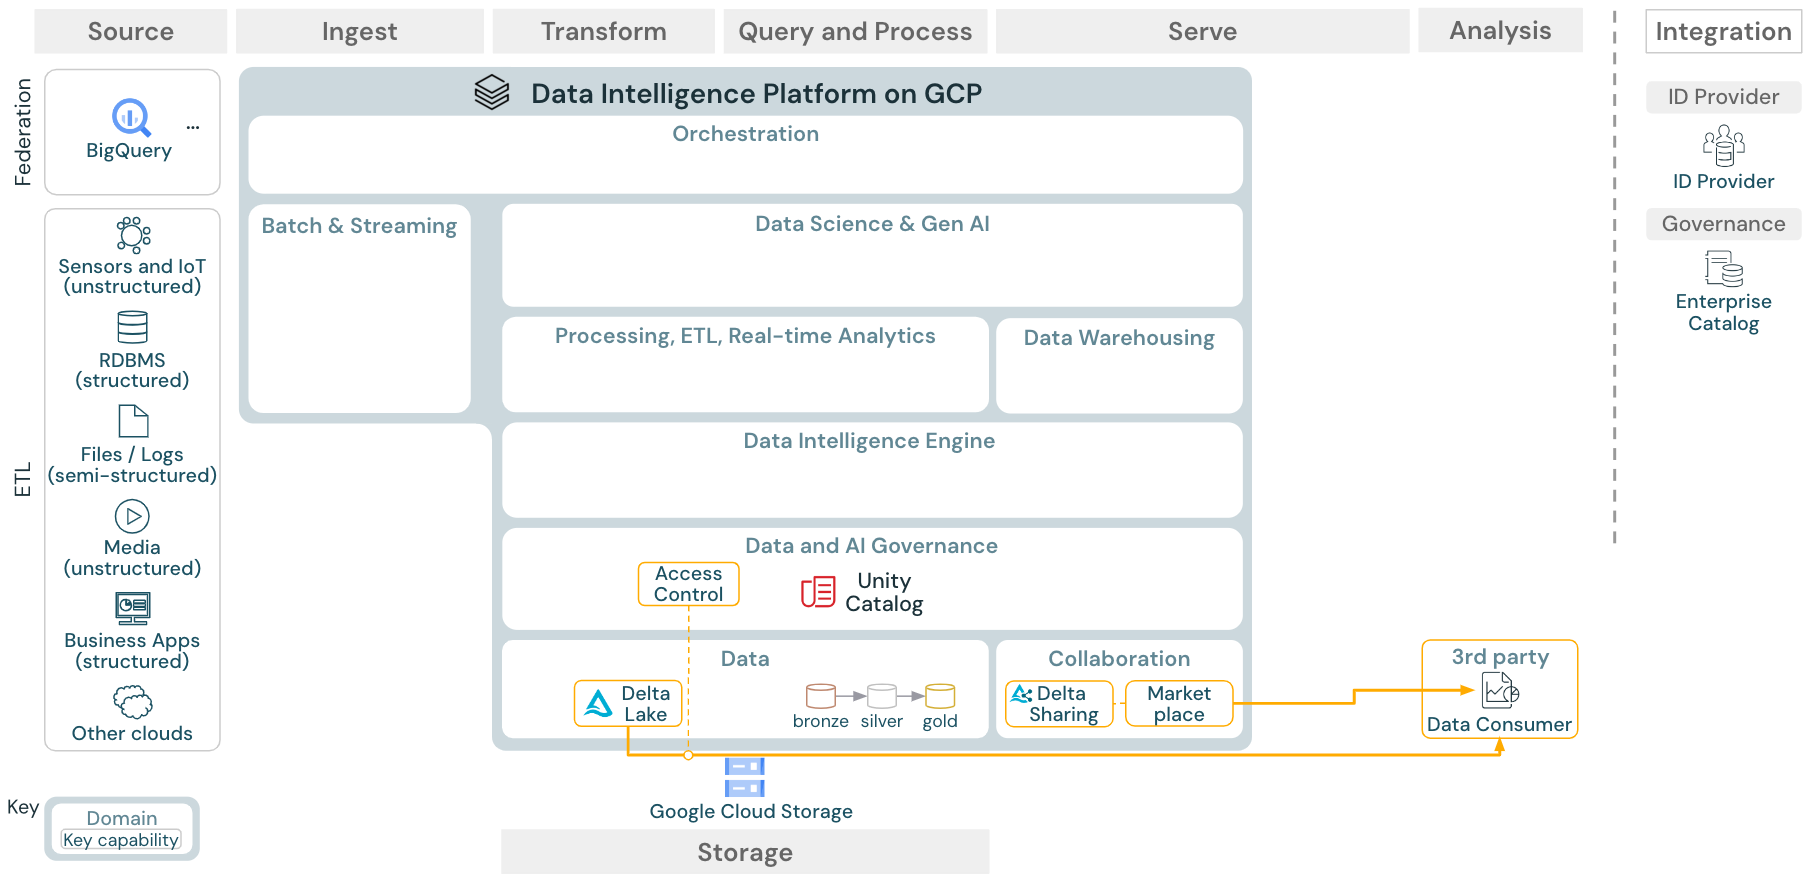 Enterprise data sharing reference architecture for Databricks on GCP